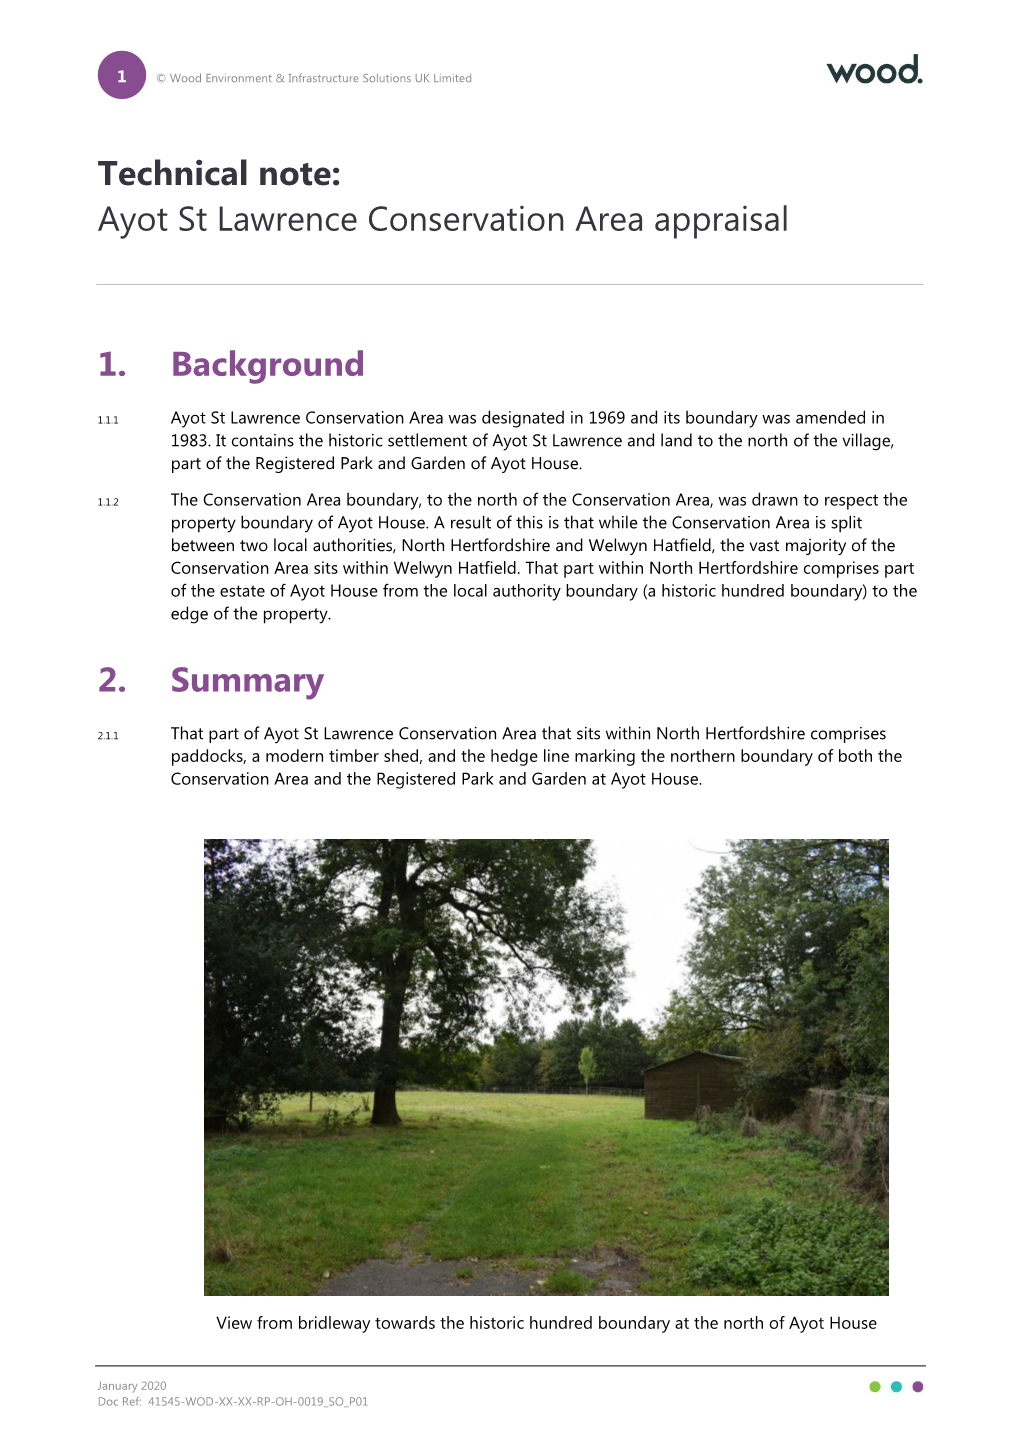 Ayot St Lawrence Conservation Area Character Note